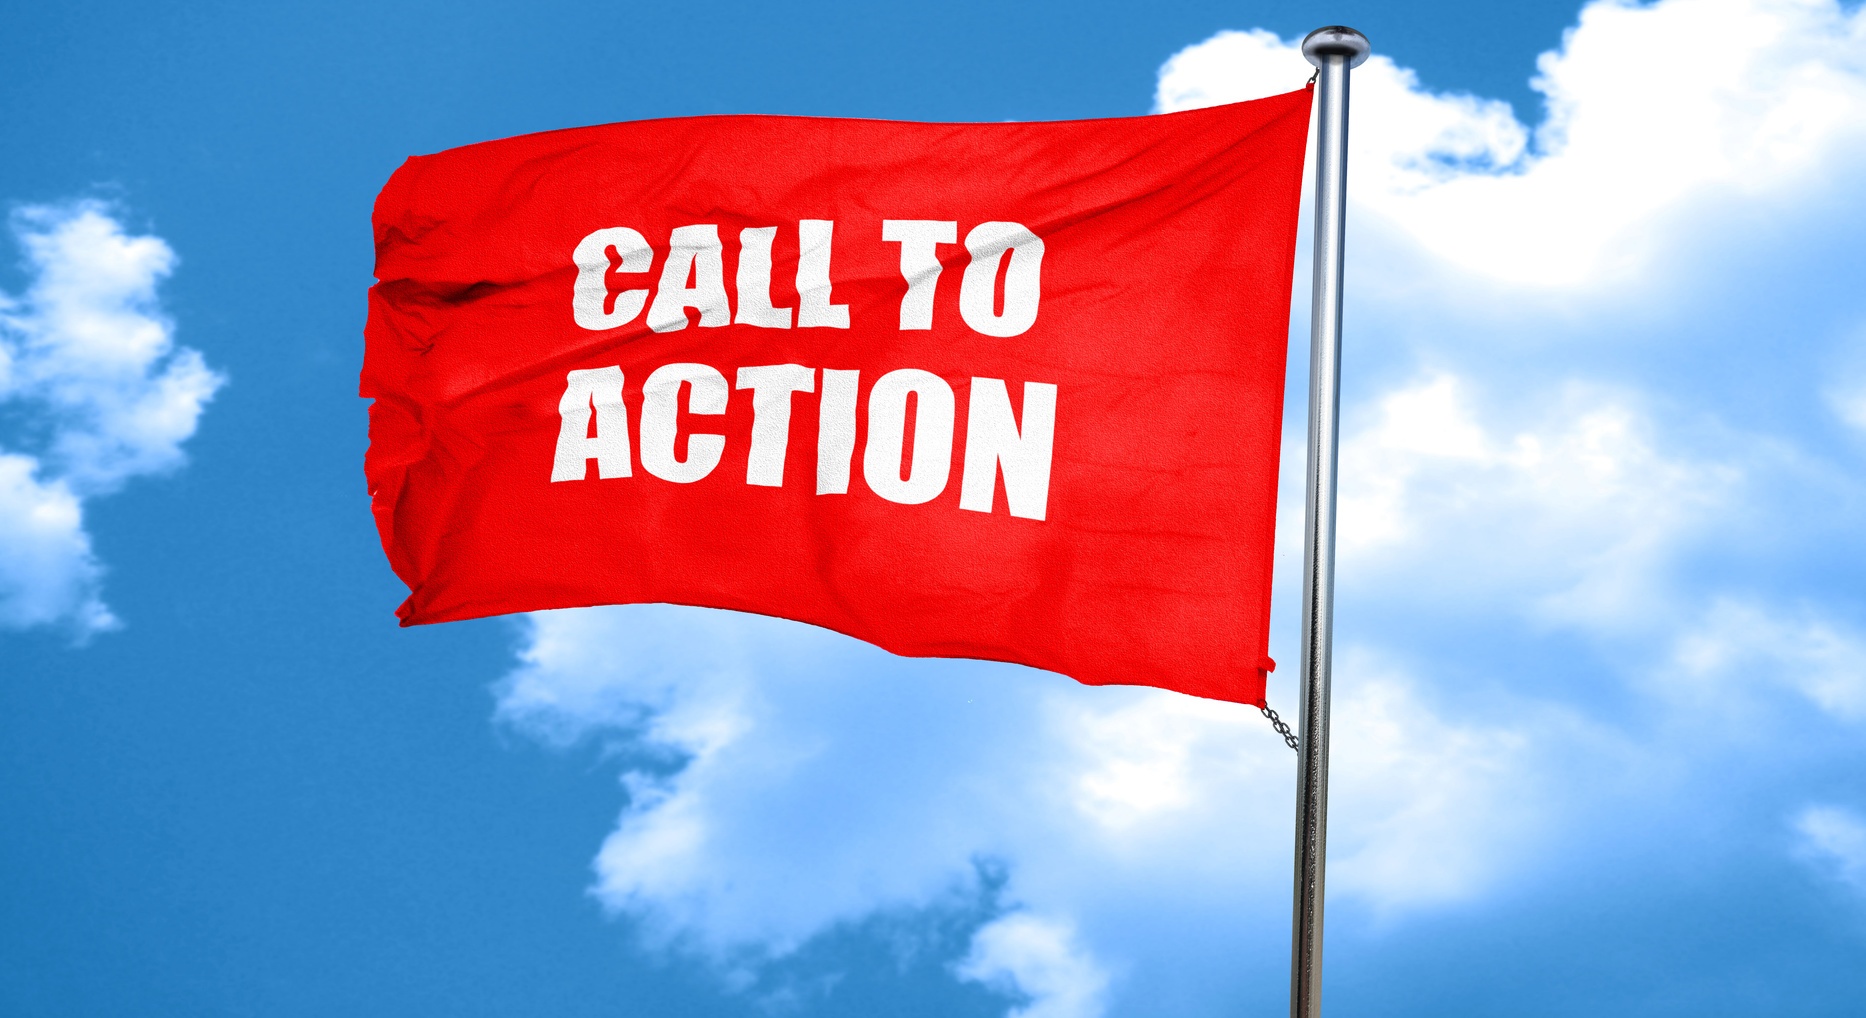 4 Keys to Creating A+ Calls to Action